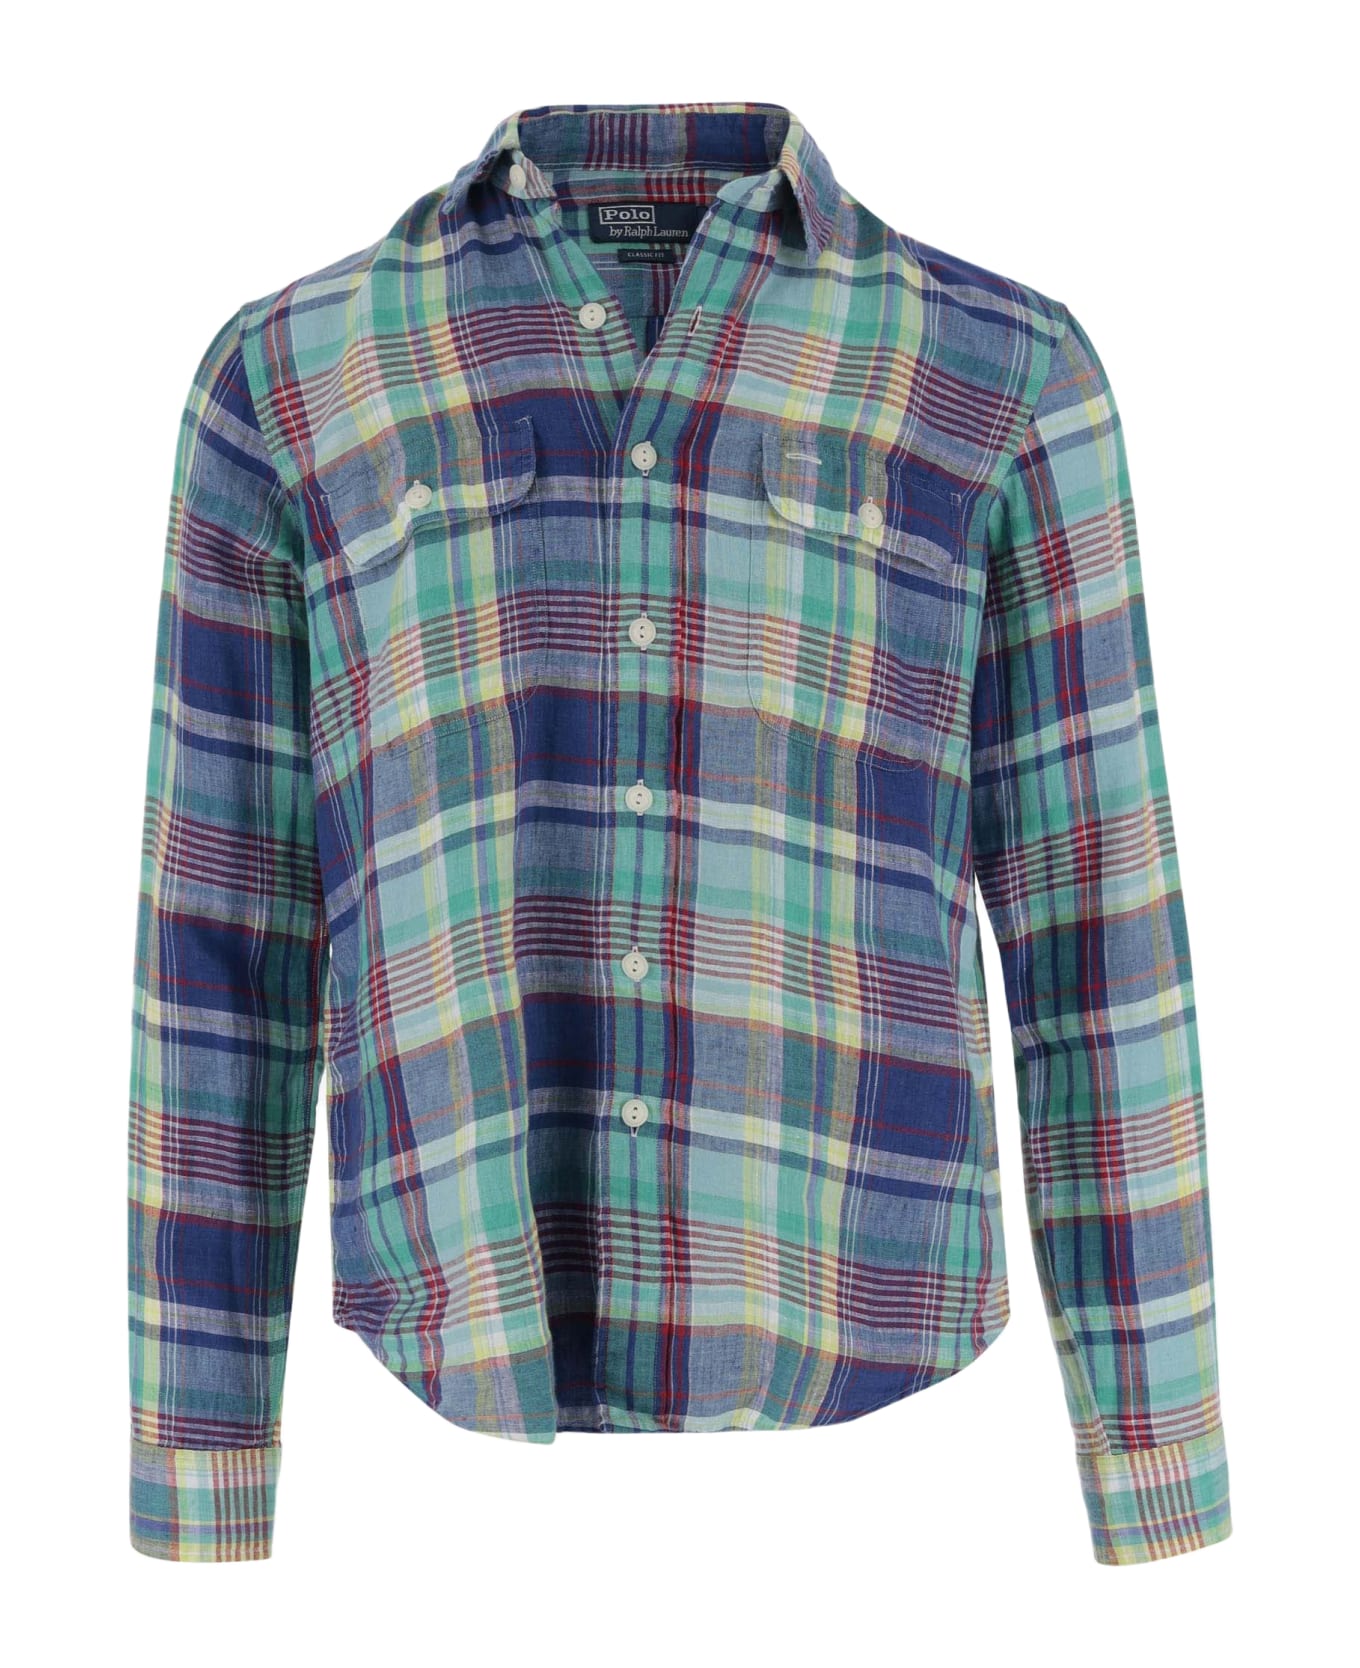 Polo Ralph Lauren Cotton Shirt With Check Pattern - Red